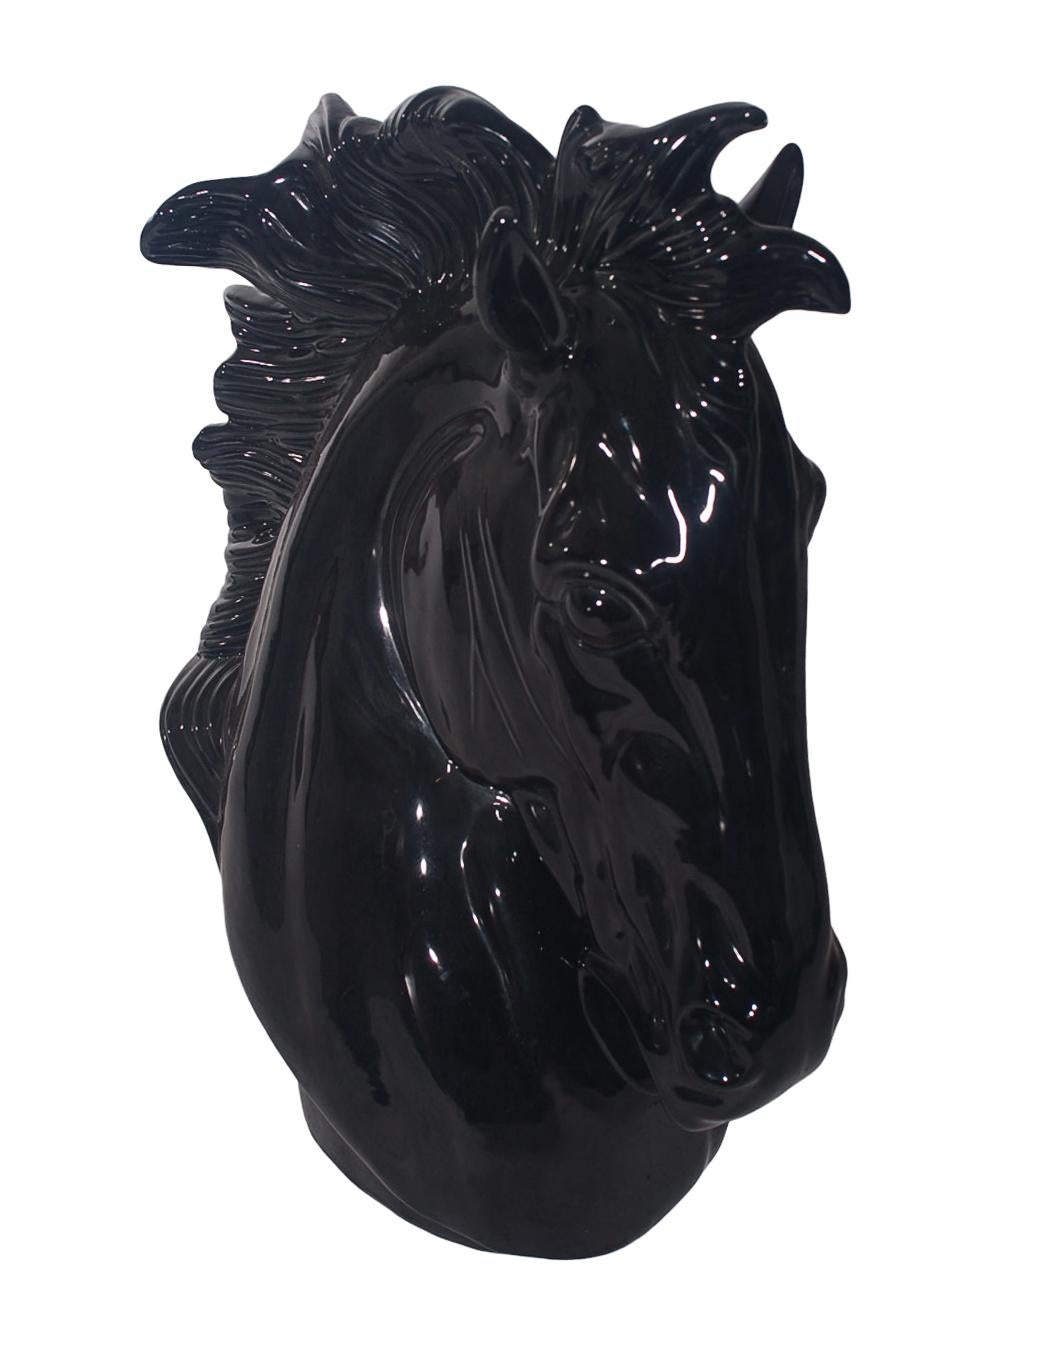 A large and chic horse head sculpture made in Mexico, circa 1980s. This piece features all ceramic construction with a shiny black glass.